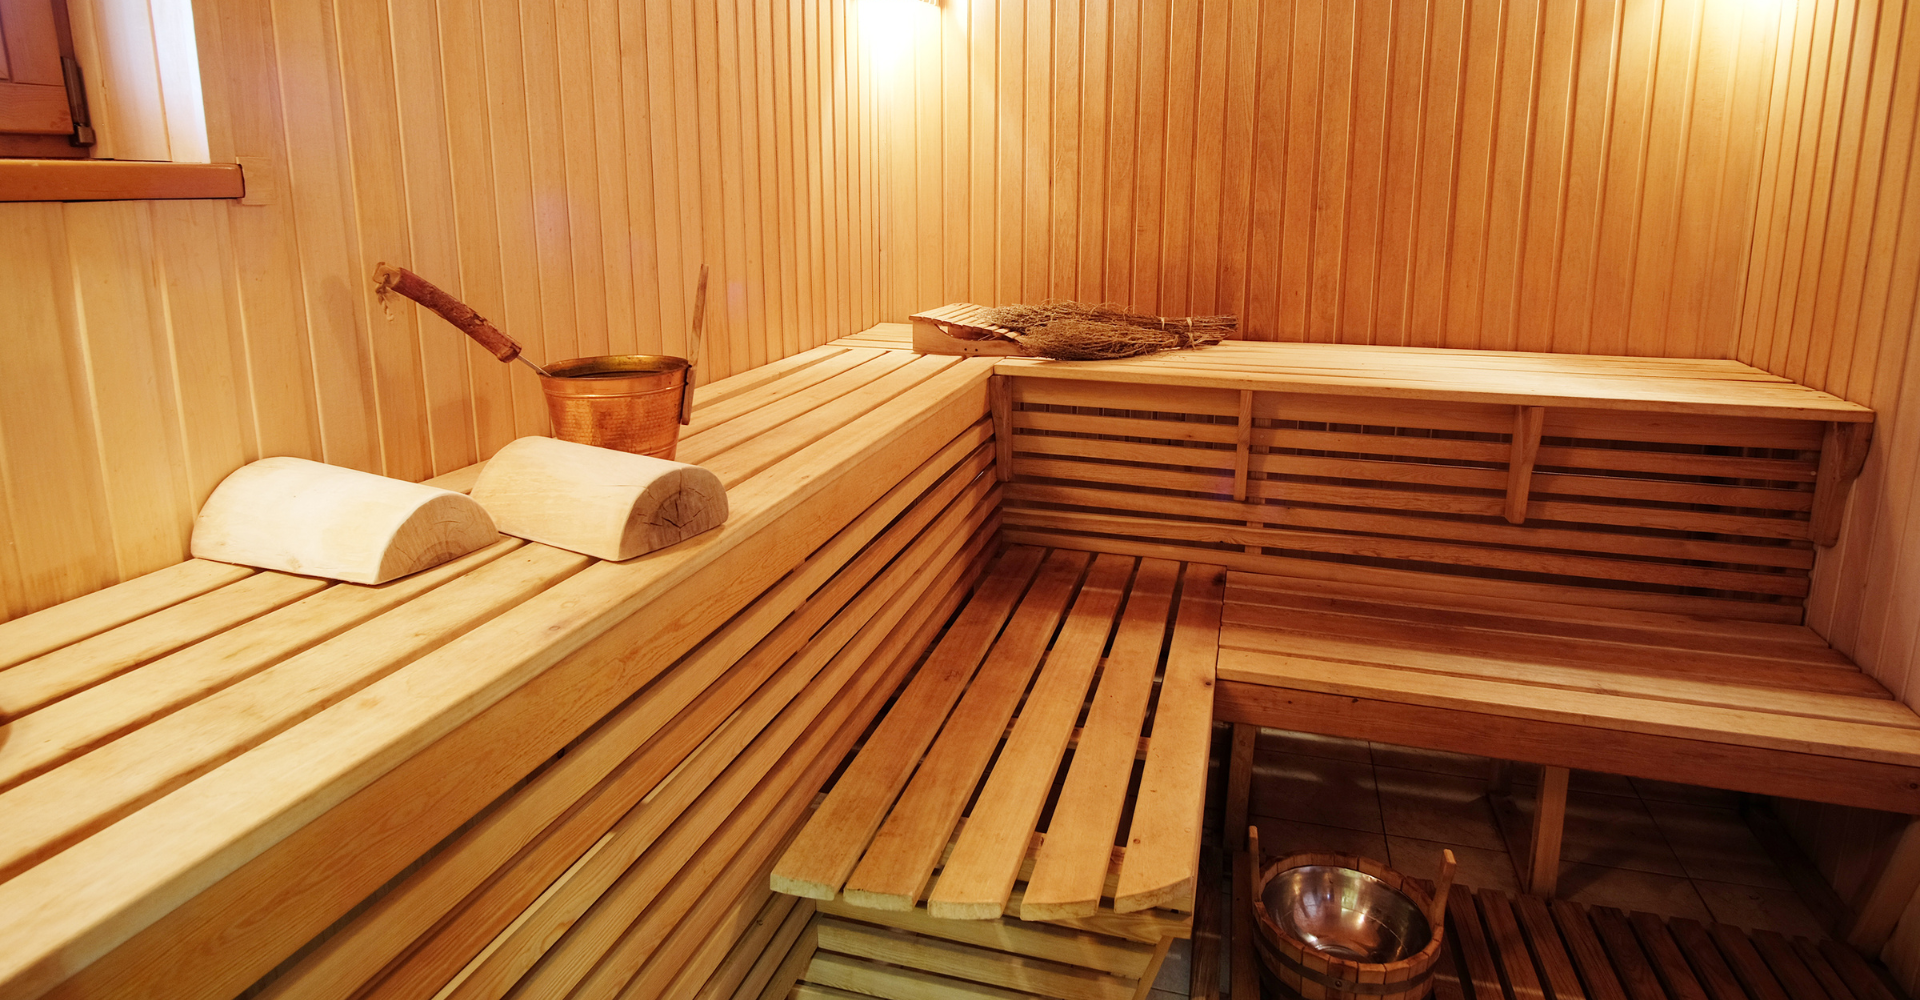 The Pros and Cons of Saunas: Exploring the Health Benefits and Risks for Your Body and Skin